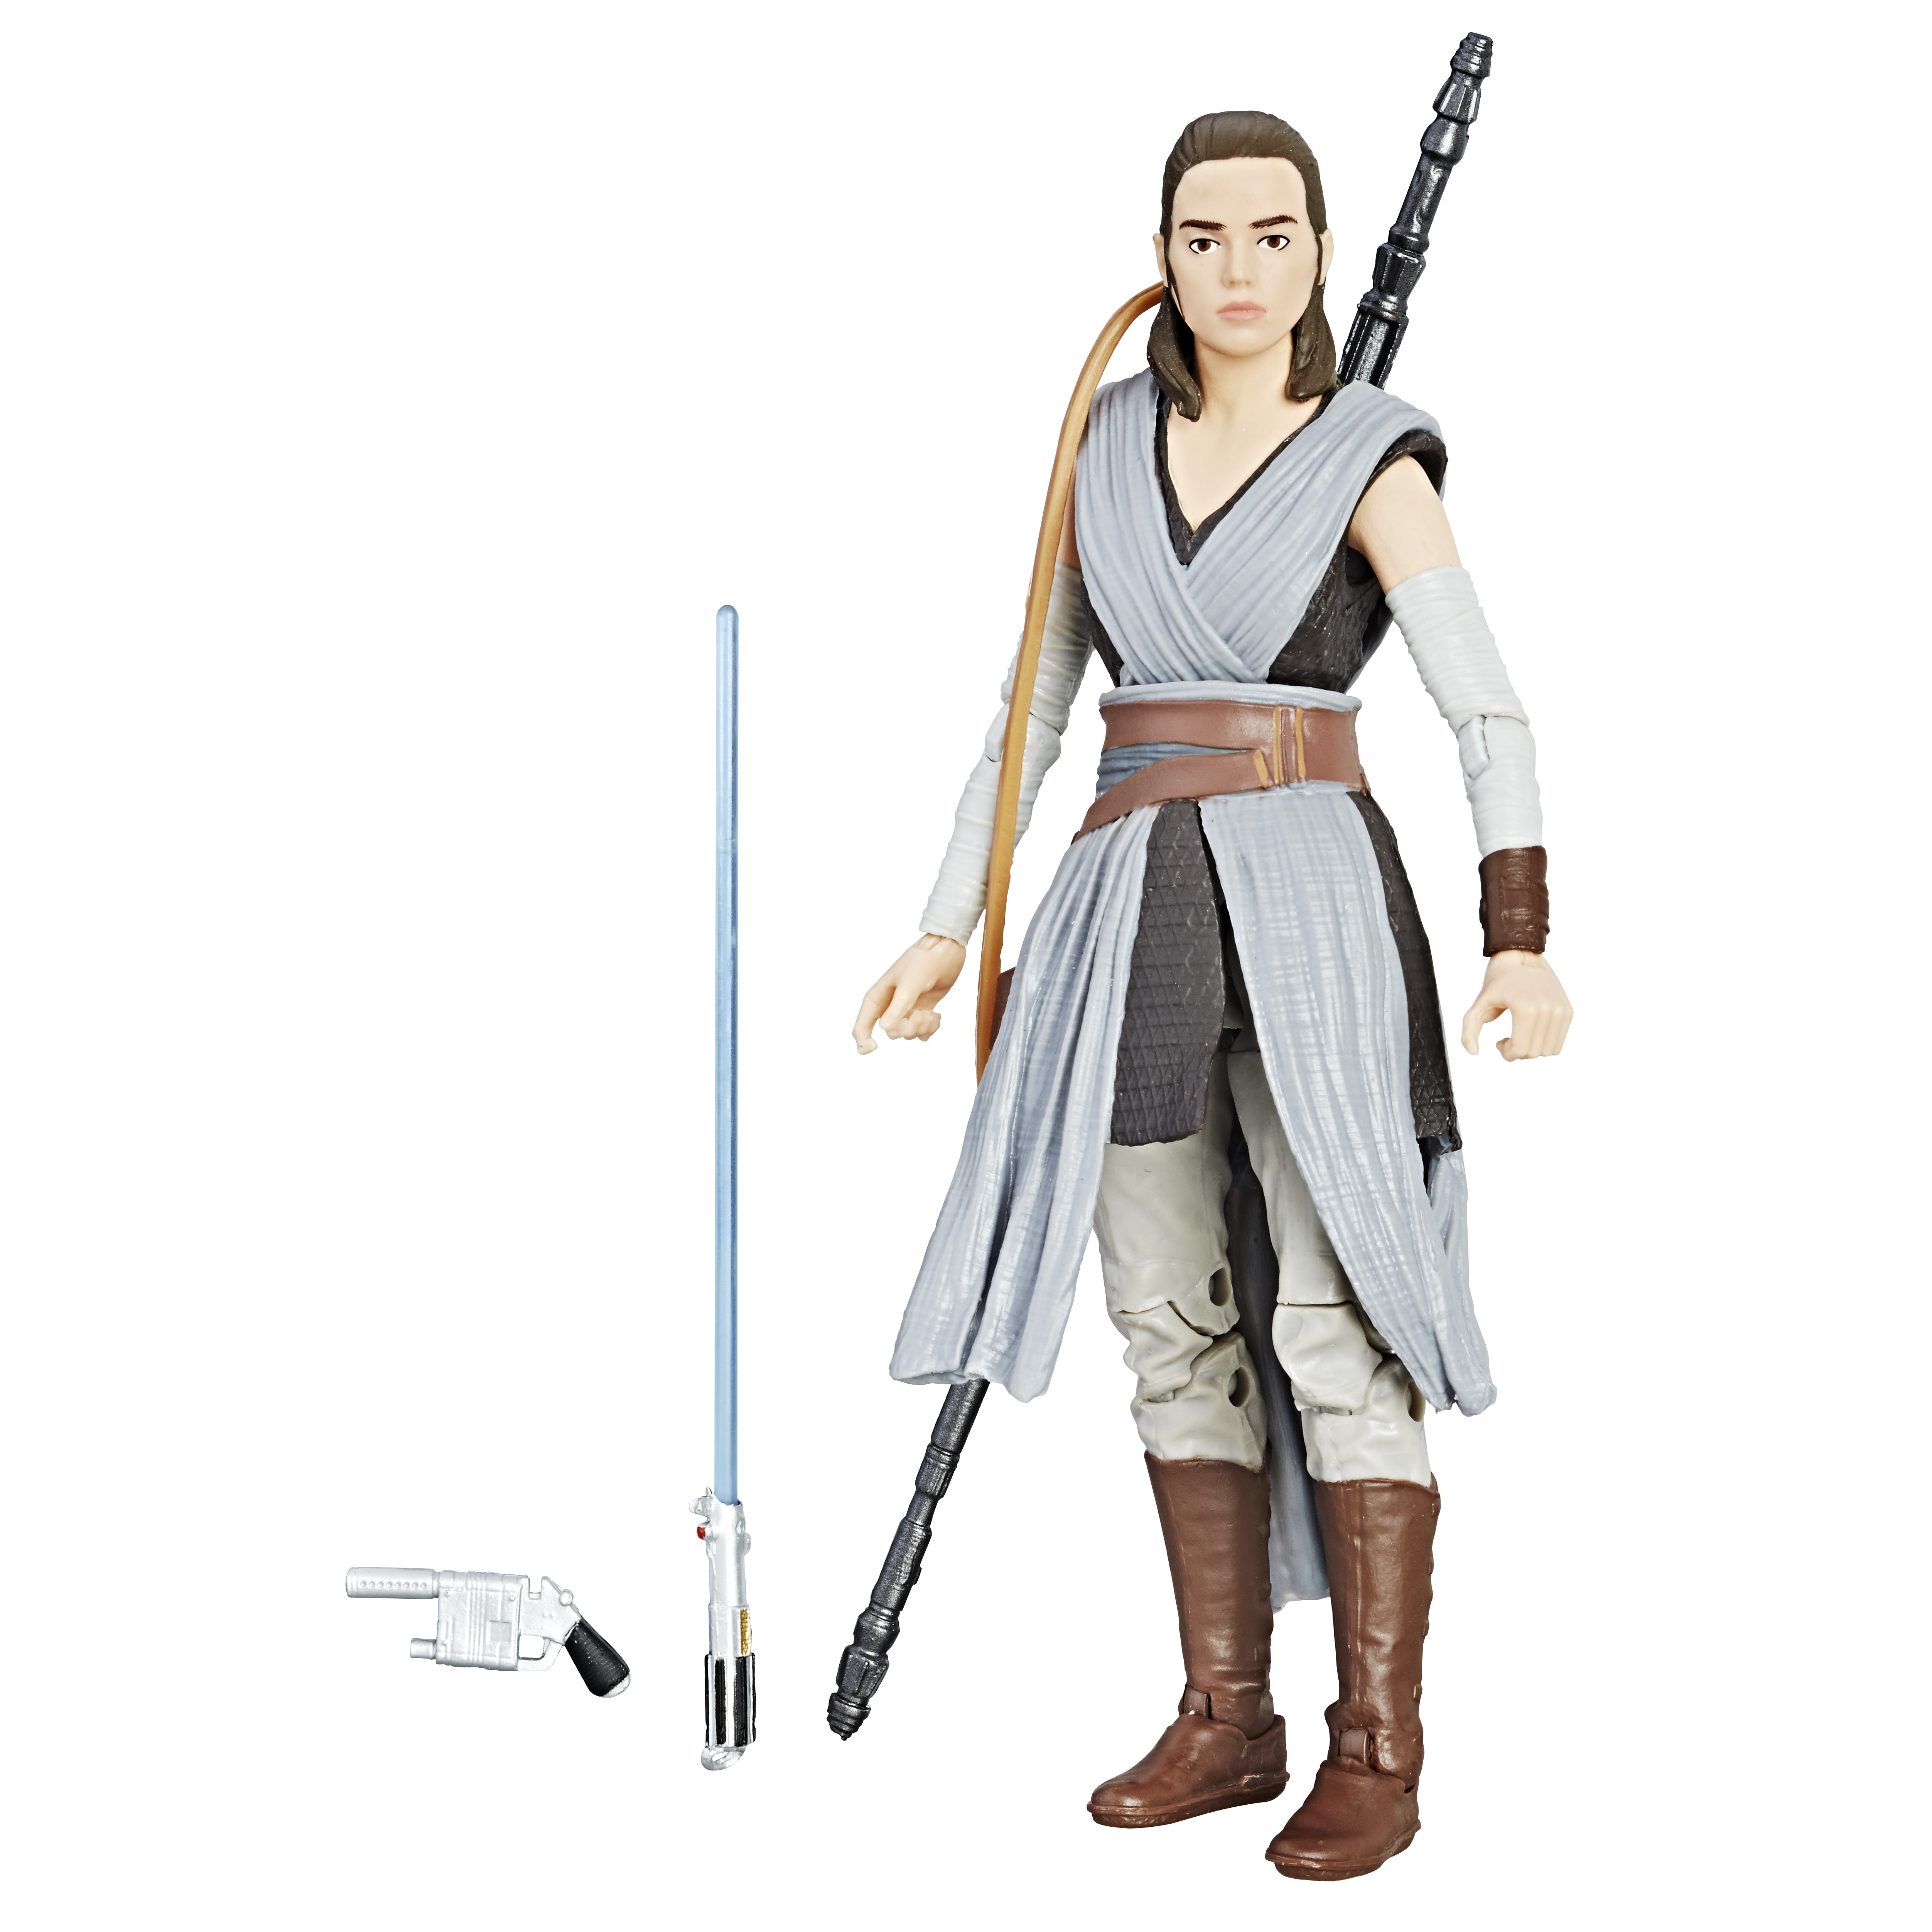 Hasbro's Toy Line from Star Wars: The Last Jedi Hits Store Shelves 